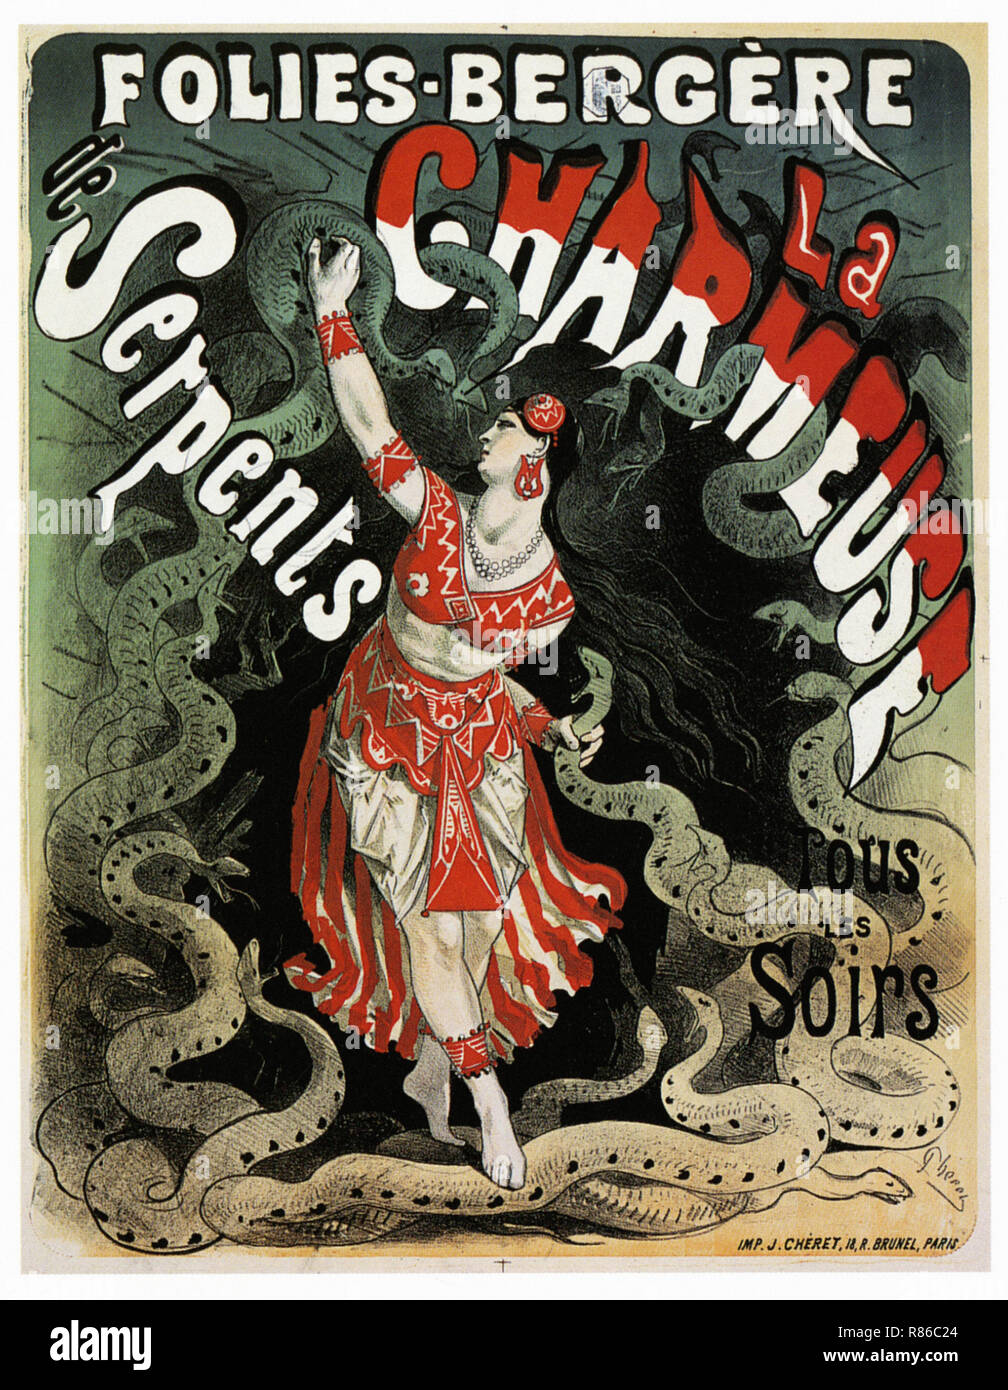 The Charmer Of Snakes Folies Bergeres - Vintage advertising poster Stock Photo